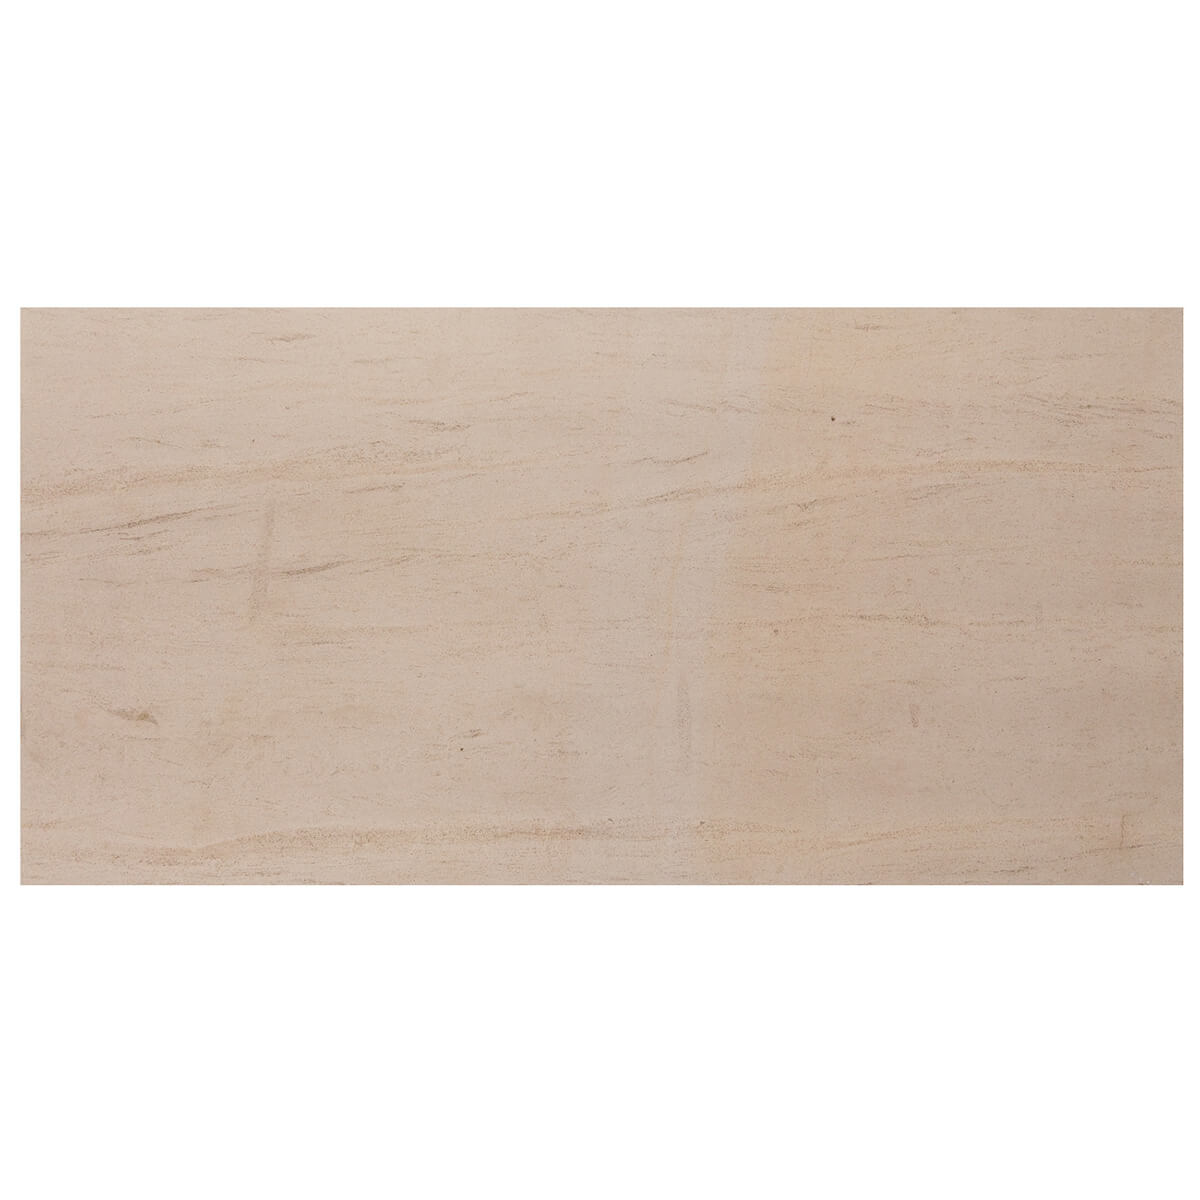 Moca Creme limestone field tile - 12x24x0.375 inches - honed finish - durable for medium traffic areas